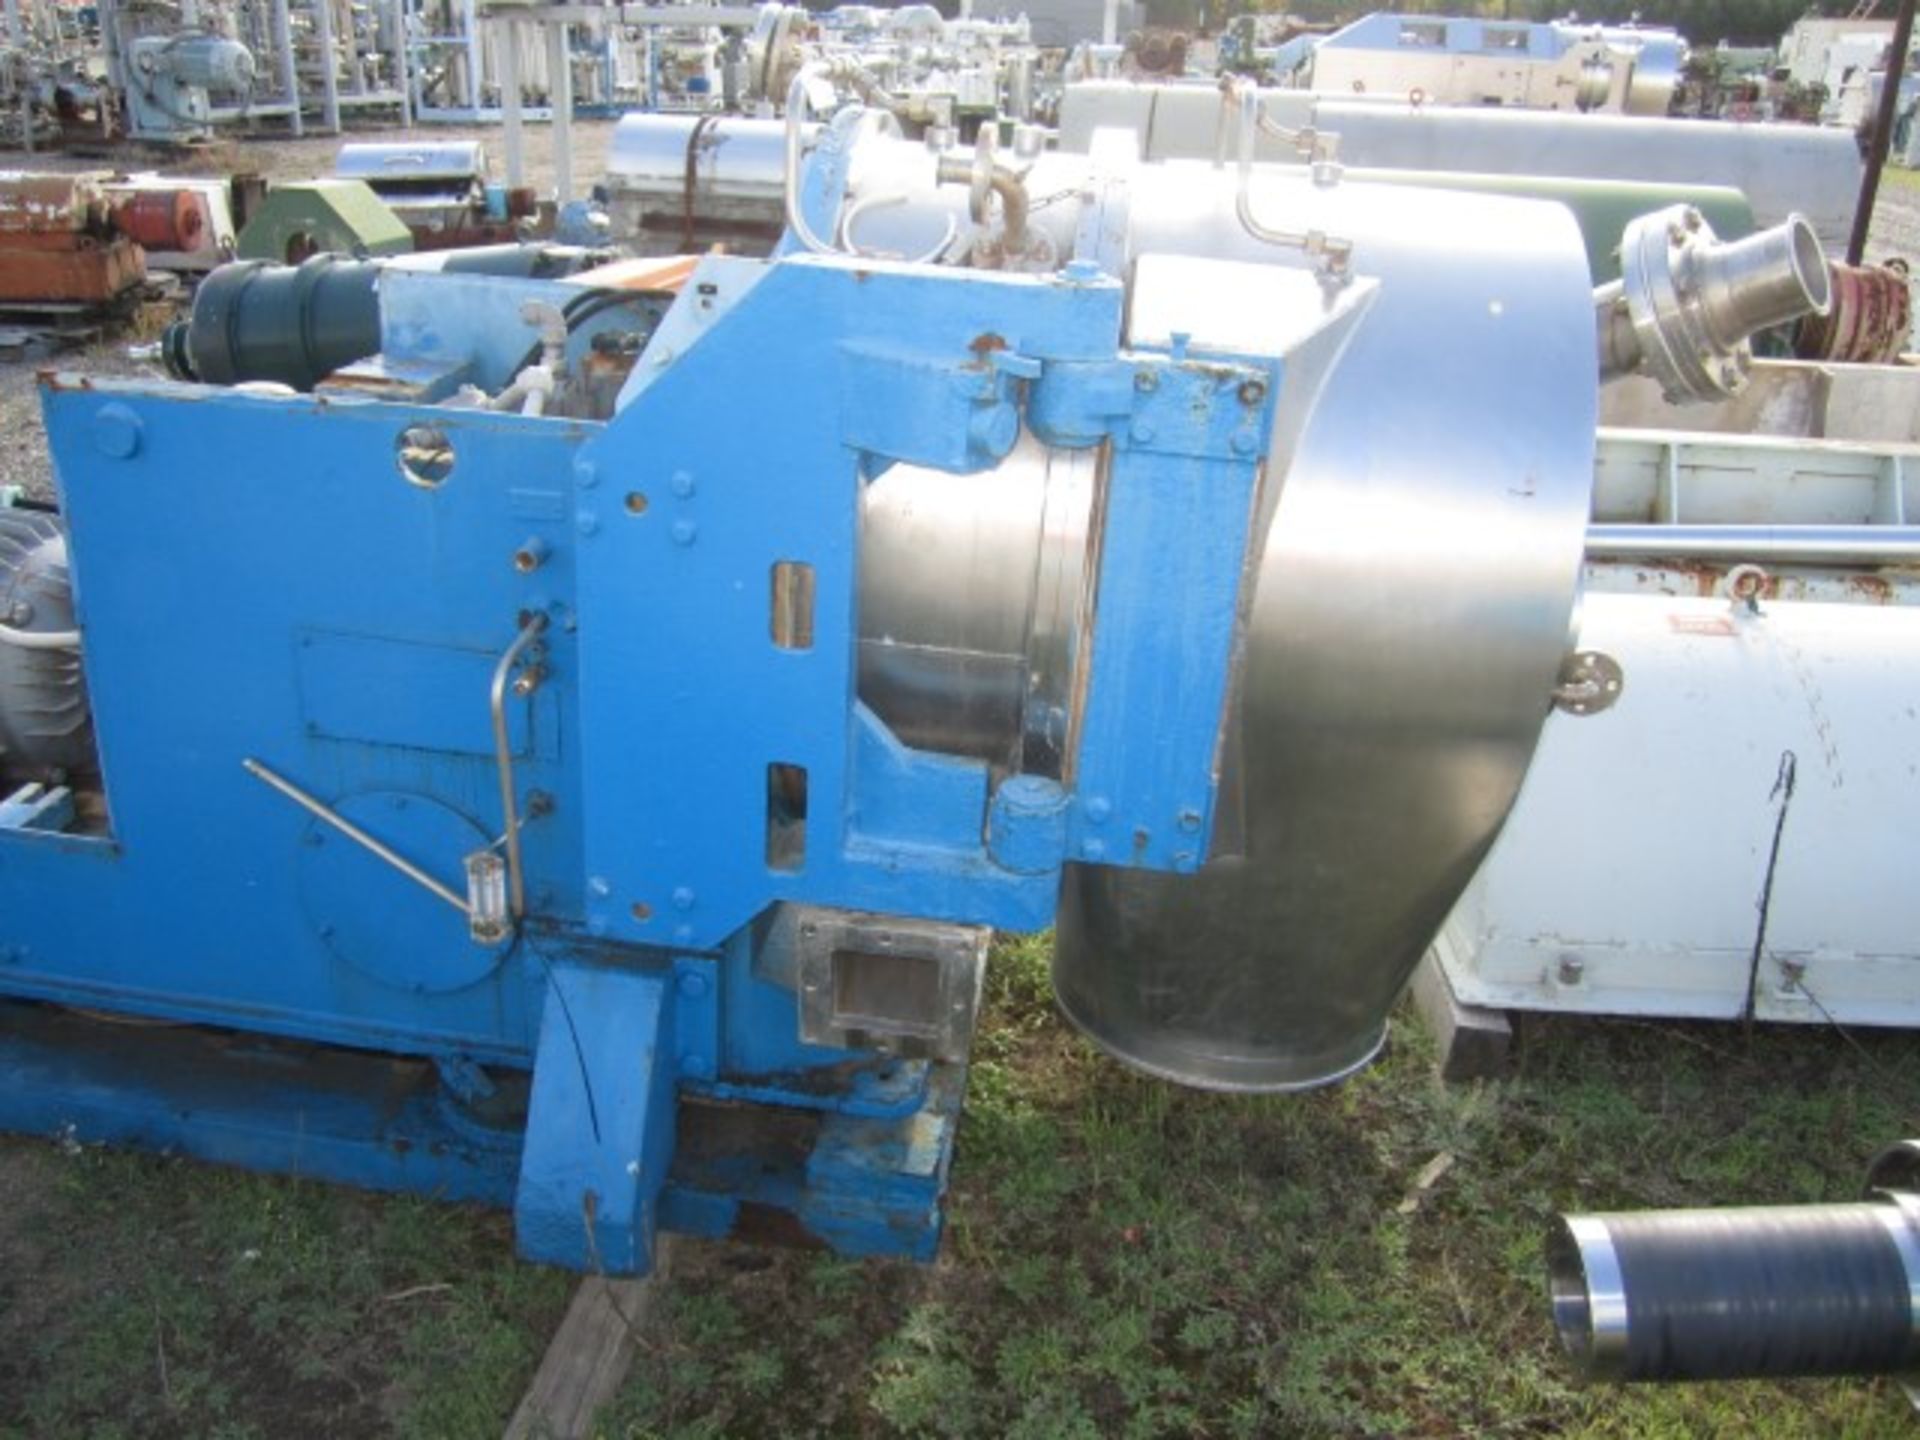 Heinkel HF-600 Inverting Filter Centrifuge. Hastelloy C-4 construction on product contact areas. - Image 8 of 11